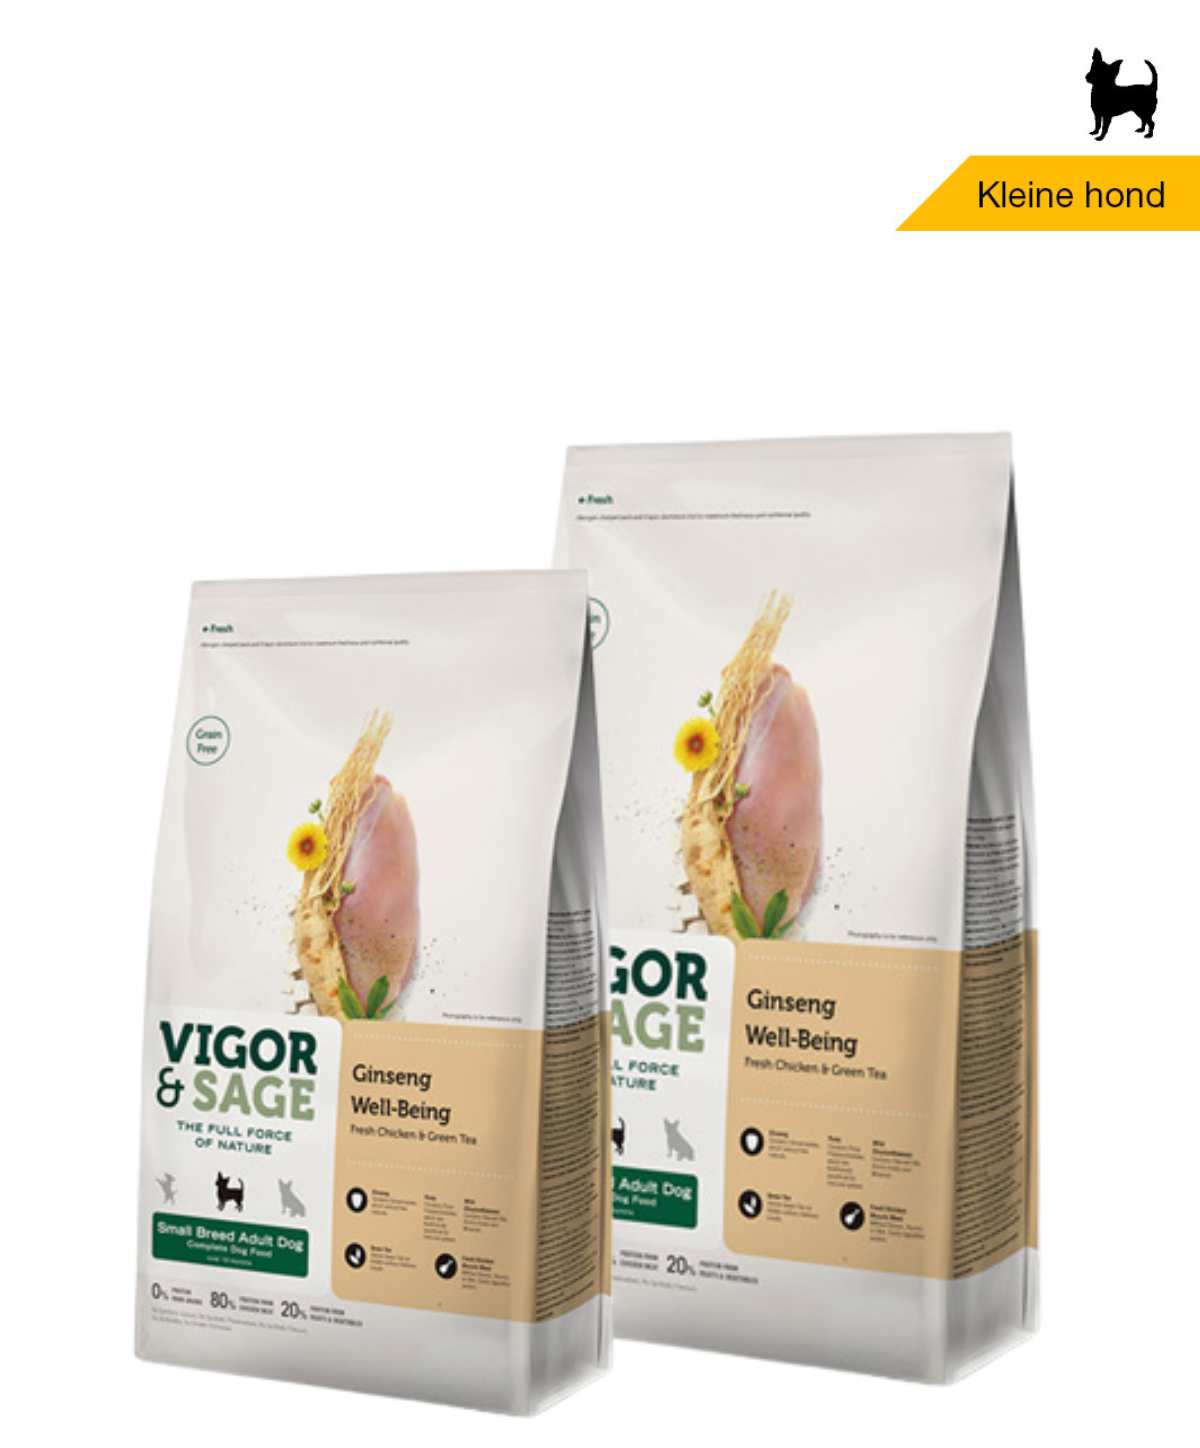 Vigor & Sage Ginseng Well Being - Small breed adult